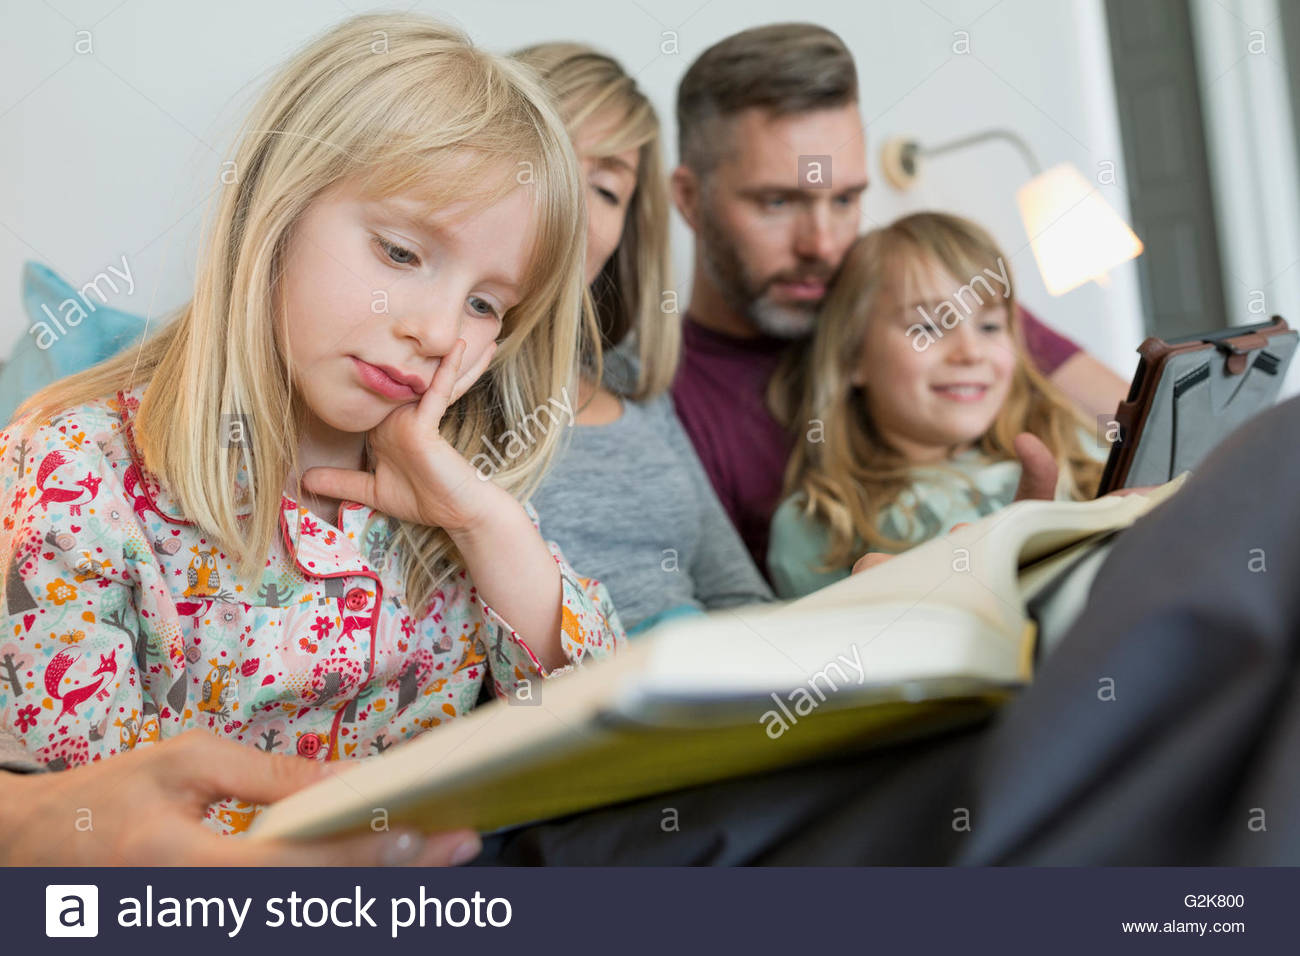 Family relaxing reading book and using digital tablet in bed Stock Photo